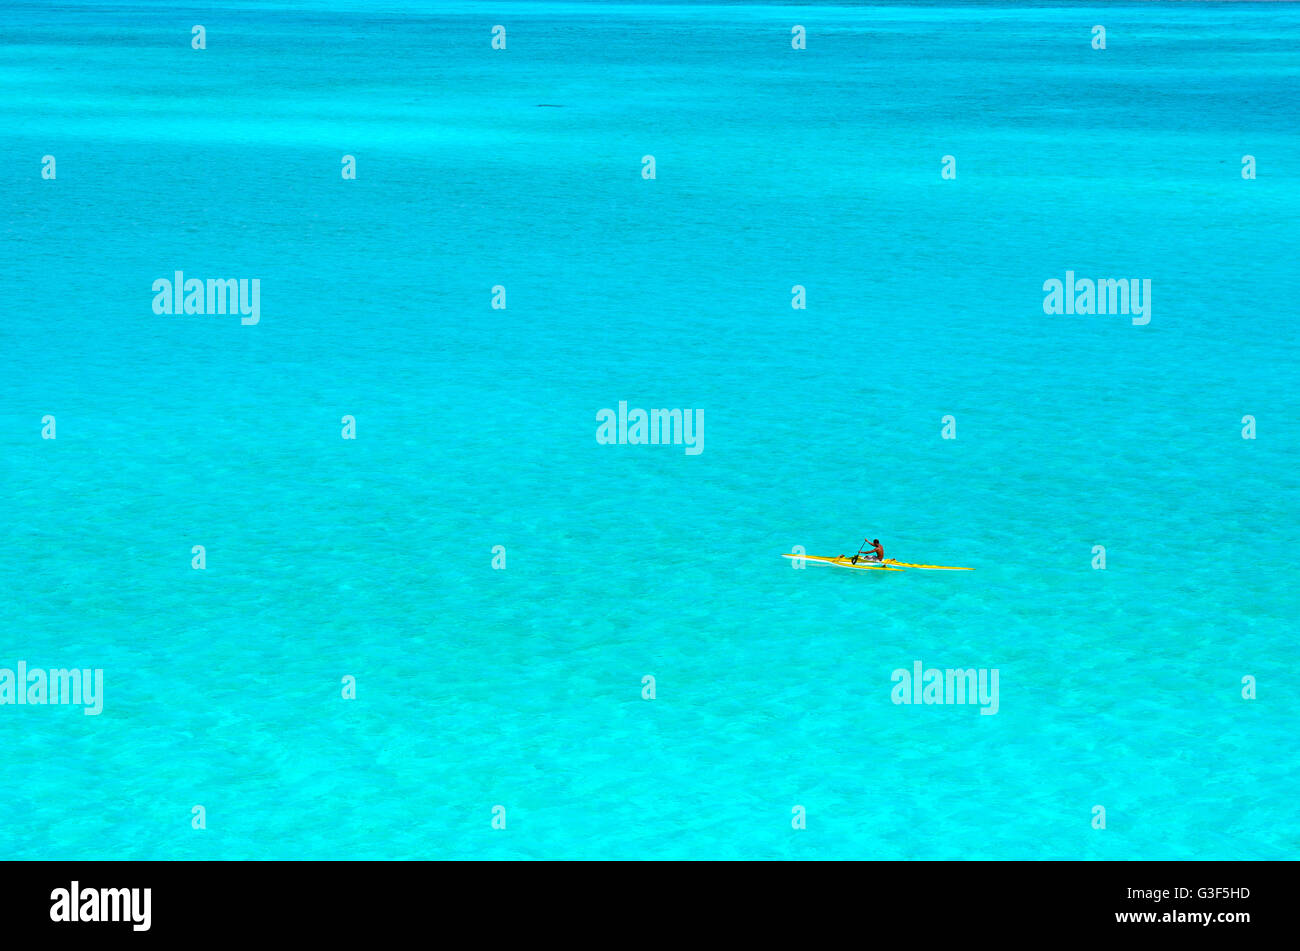 Man paddling in a yellow outrigger canoe in the clear water of the turquoise blue lagoon of Bora Bora island in Polynesia. Stock Photo